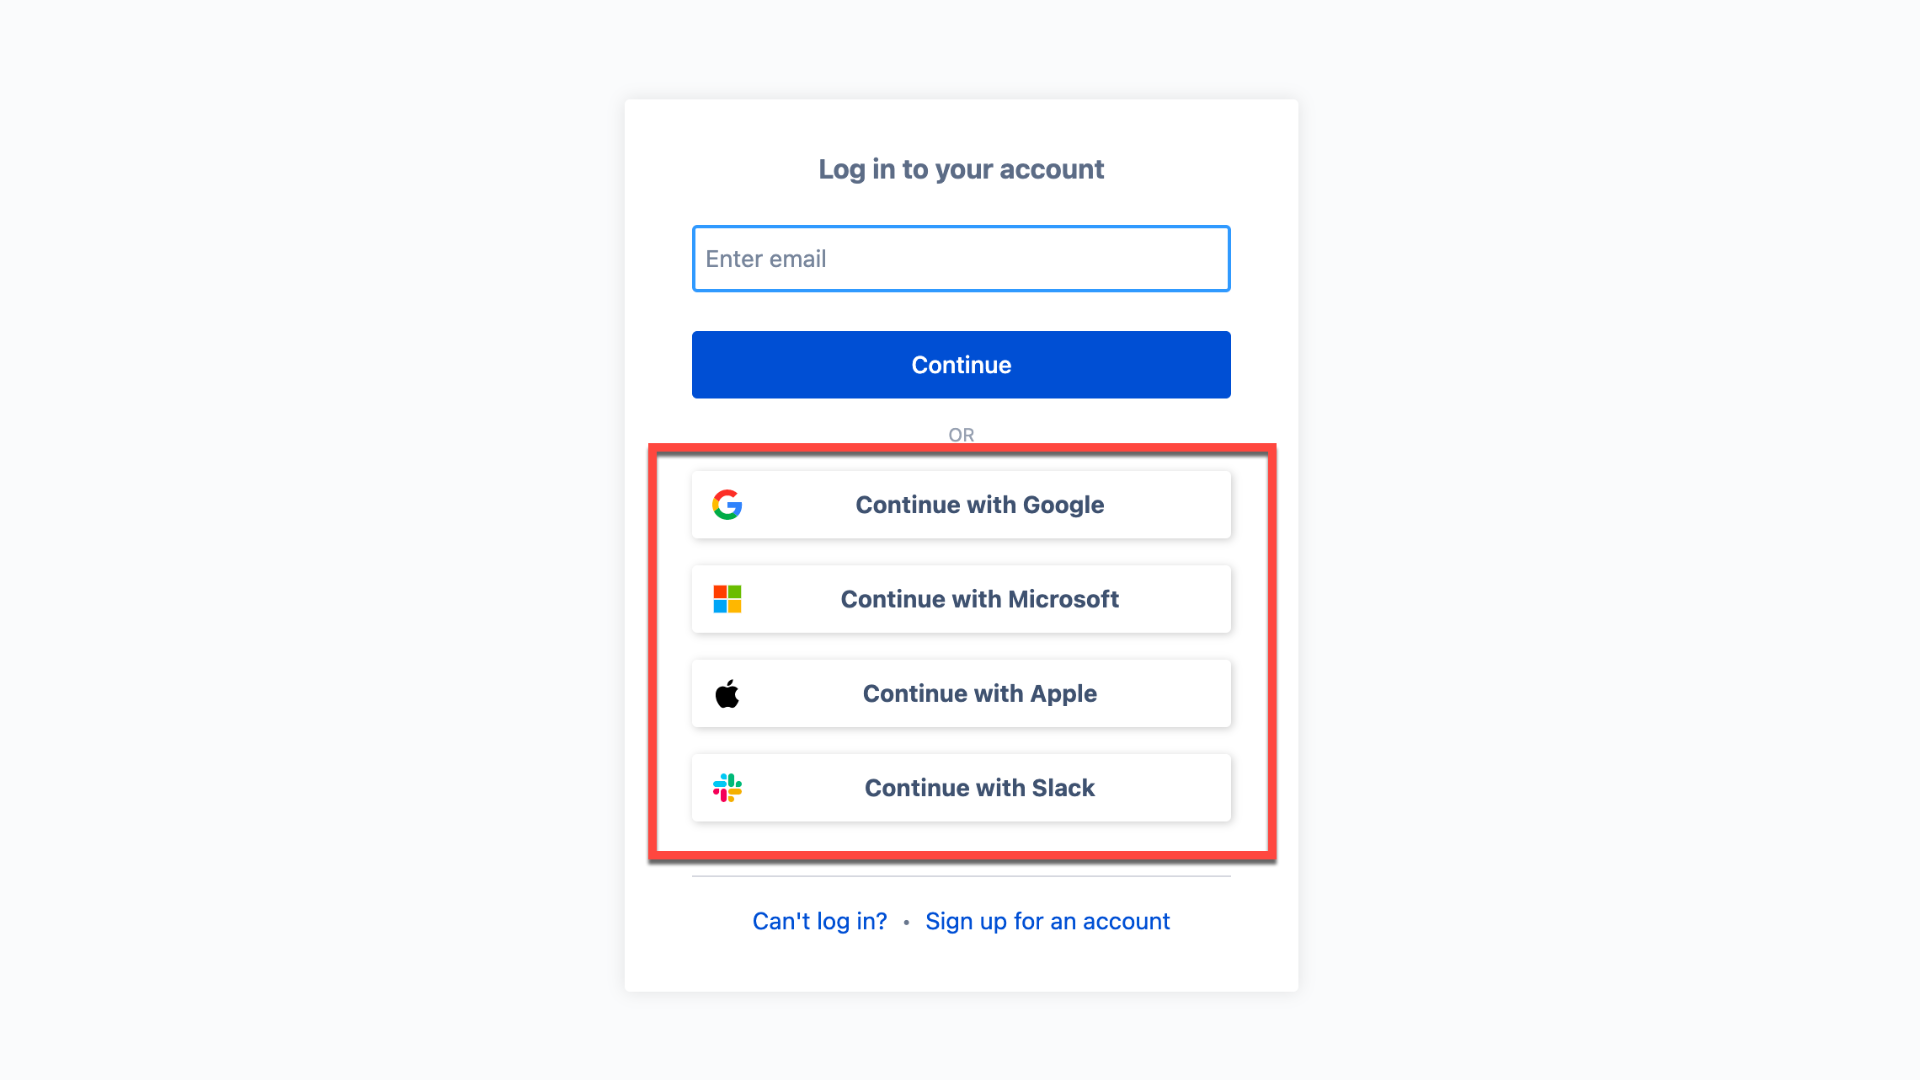 Where to find third-party login options on the login page